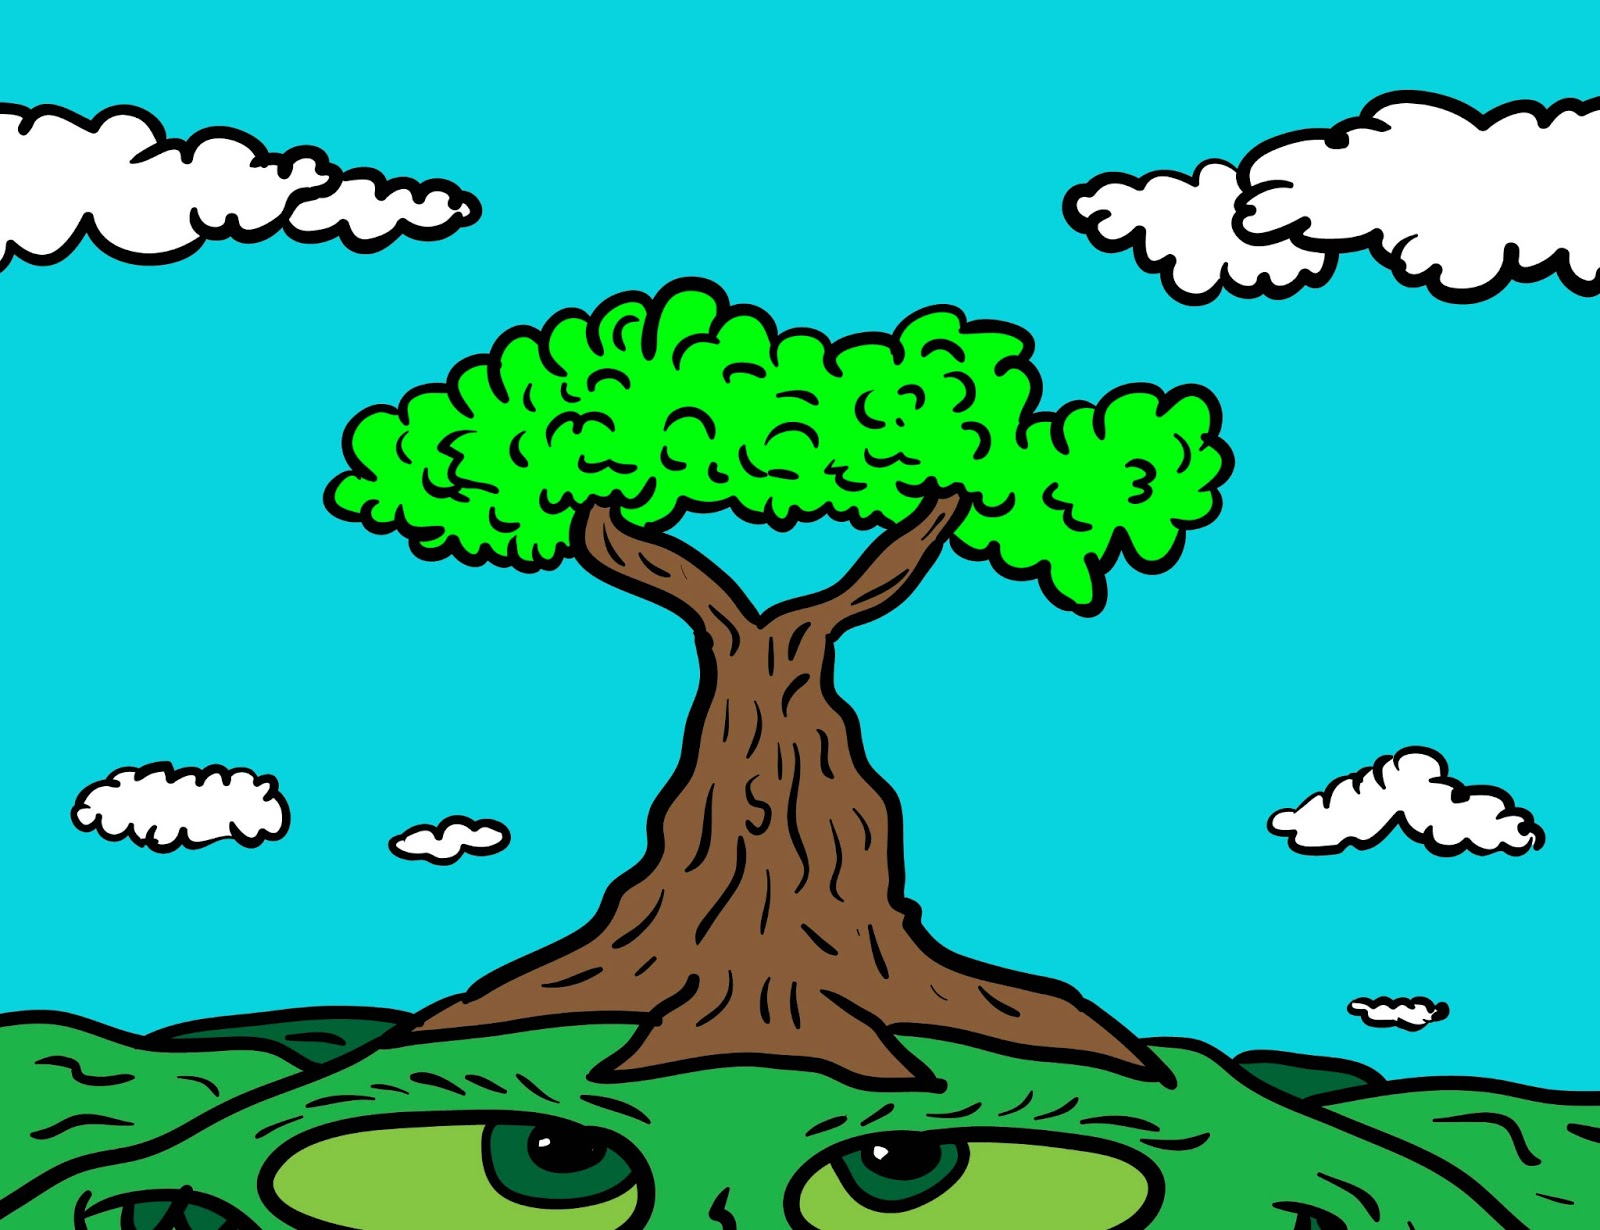 Drawing Ideas for Kids #569 How to Draw a Cartoon Tree